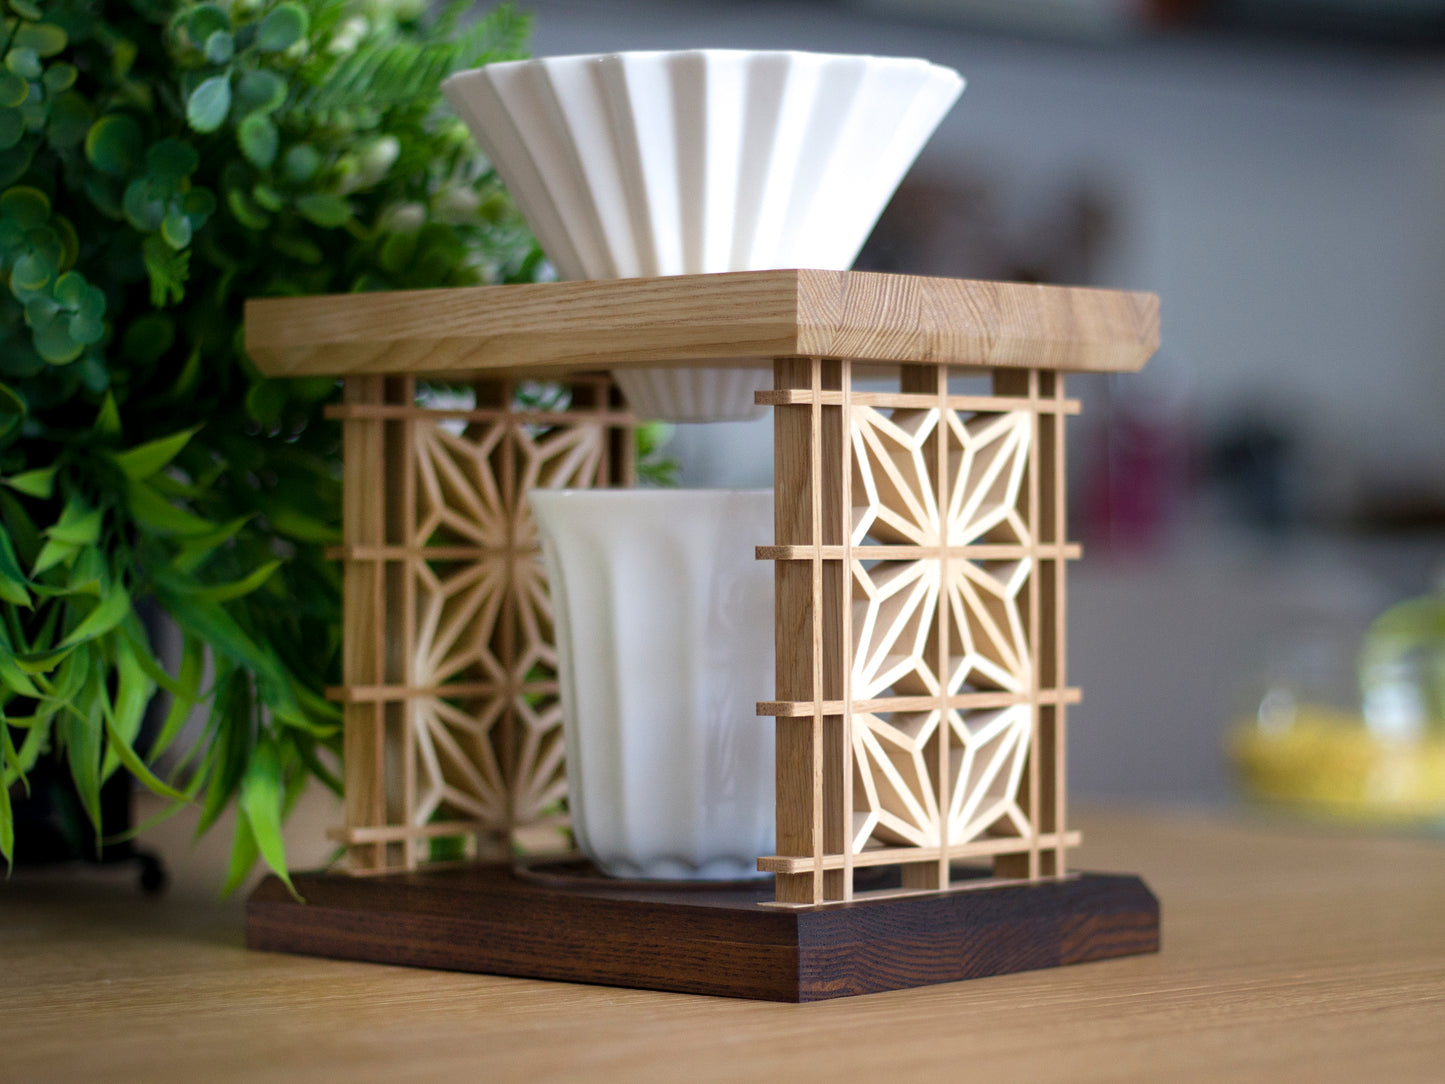 Pour over coffee stand in Kumiko style with ceramic brewer